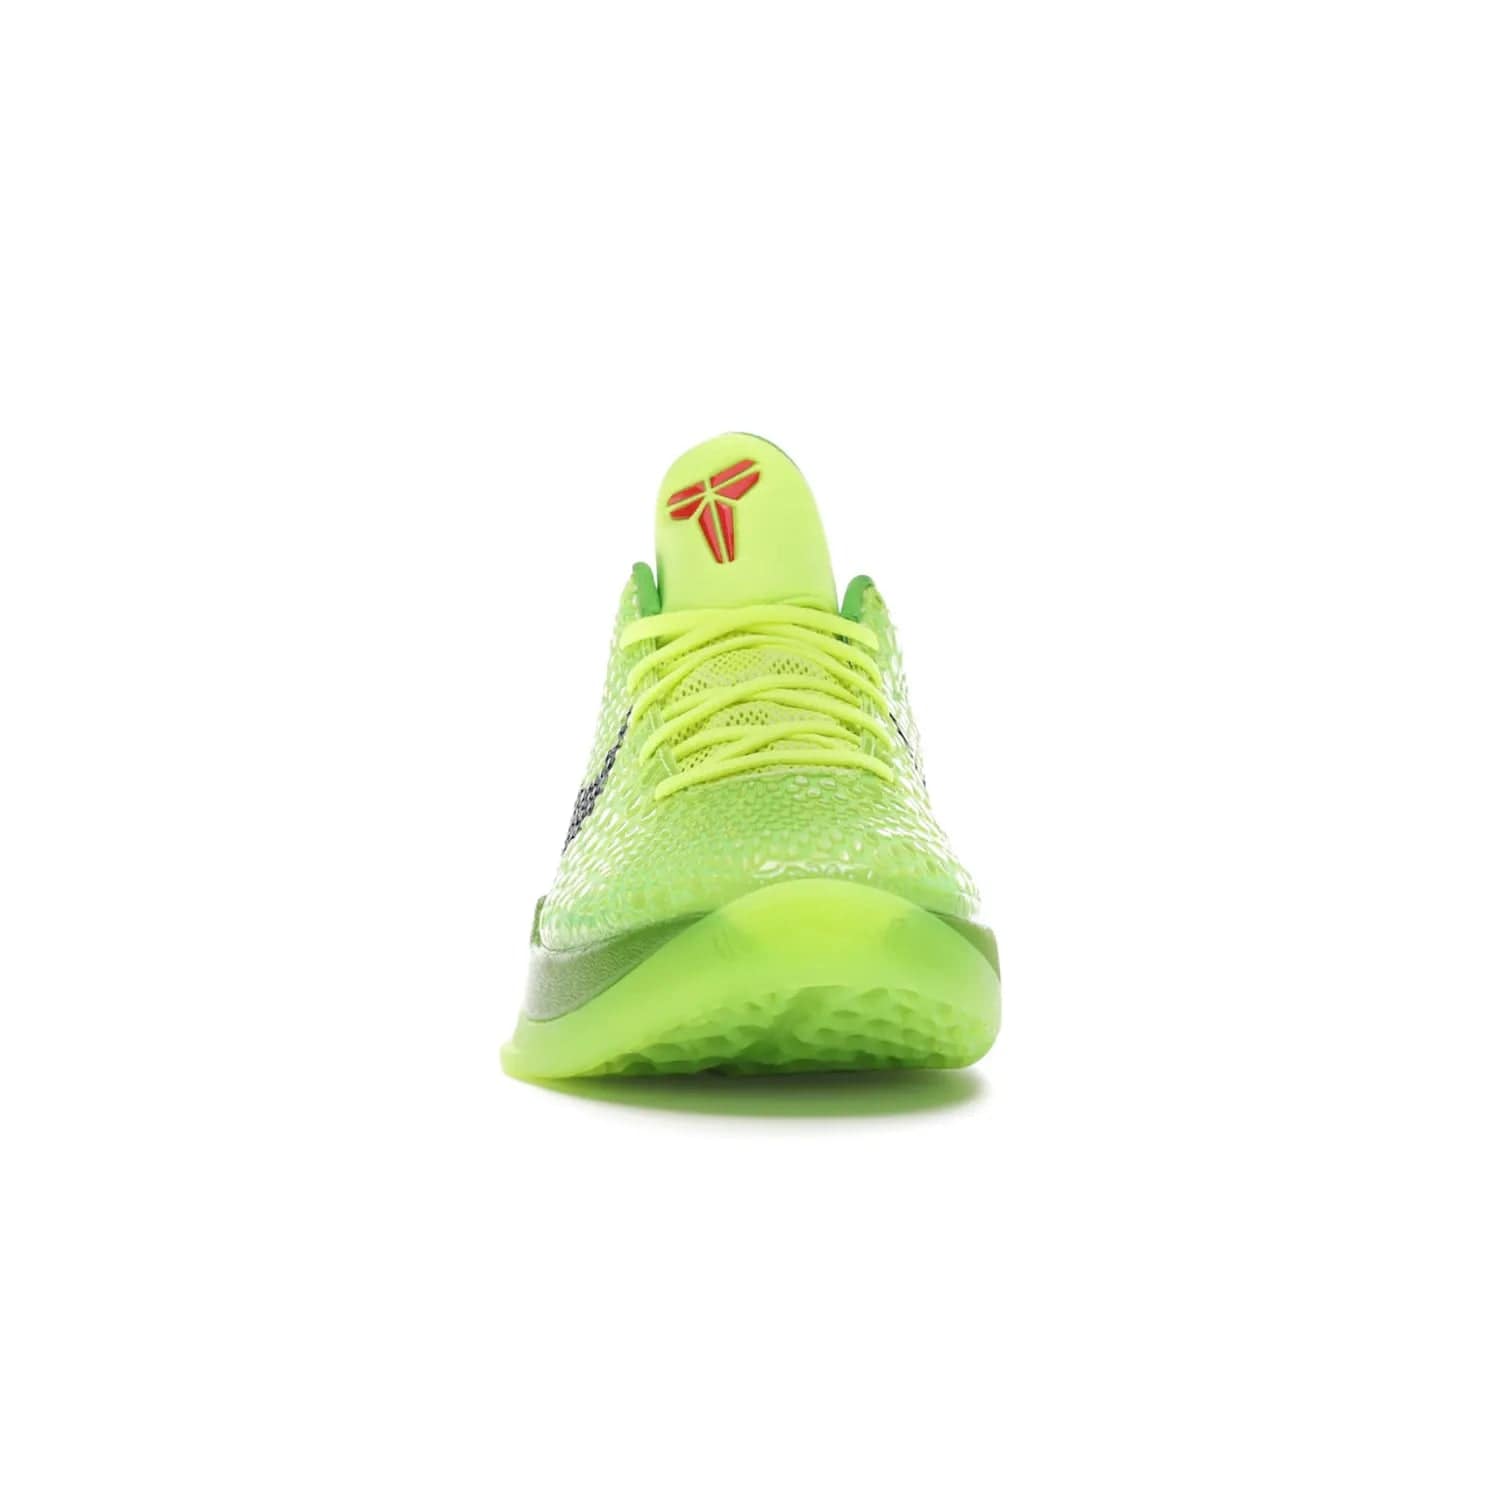 Nike Kobe 6 Protro Grinch (2020) - Image 10 - Only at www.BallersClubKickz.com - #
The Nike Kobe 6 Protro Grinch updates the iconic 2011 design with modern tech like a Zoom Air cushioning system, scaled-down traction, and updated silhouette. Experience the textured Green Apple and Volt upper plus bright red and green accents for $180.